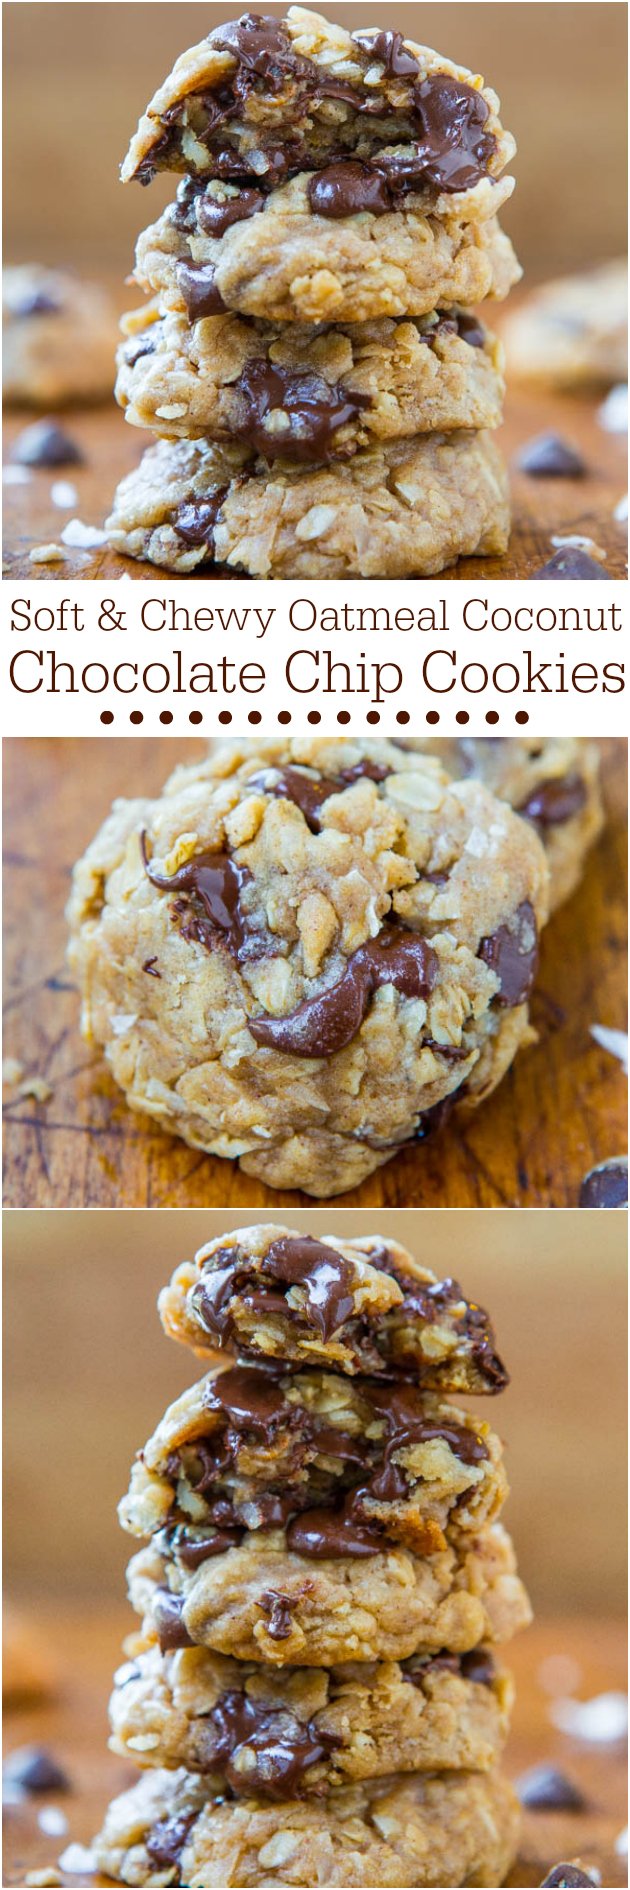 Soft Chewy Oatmeal Coconut Chocolate Chip Cookies - NO BUTTER no mixer used in these easy cookies dripping with chocolate!